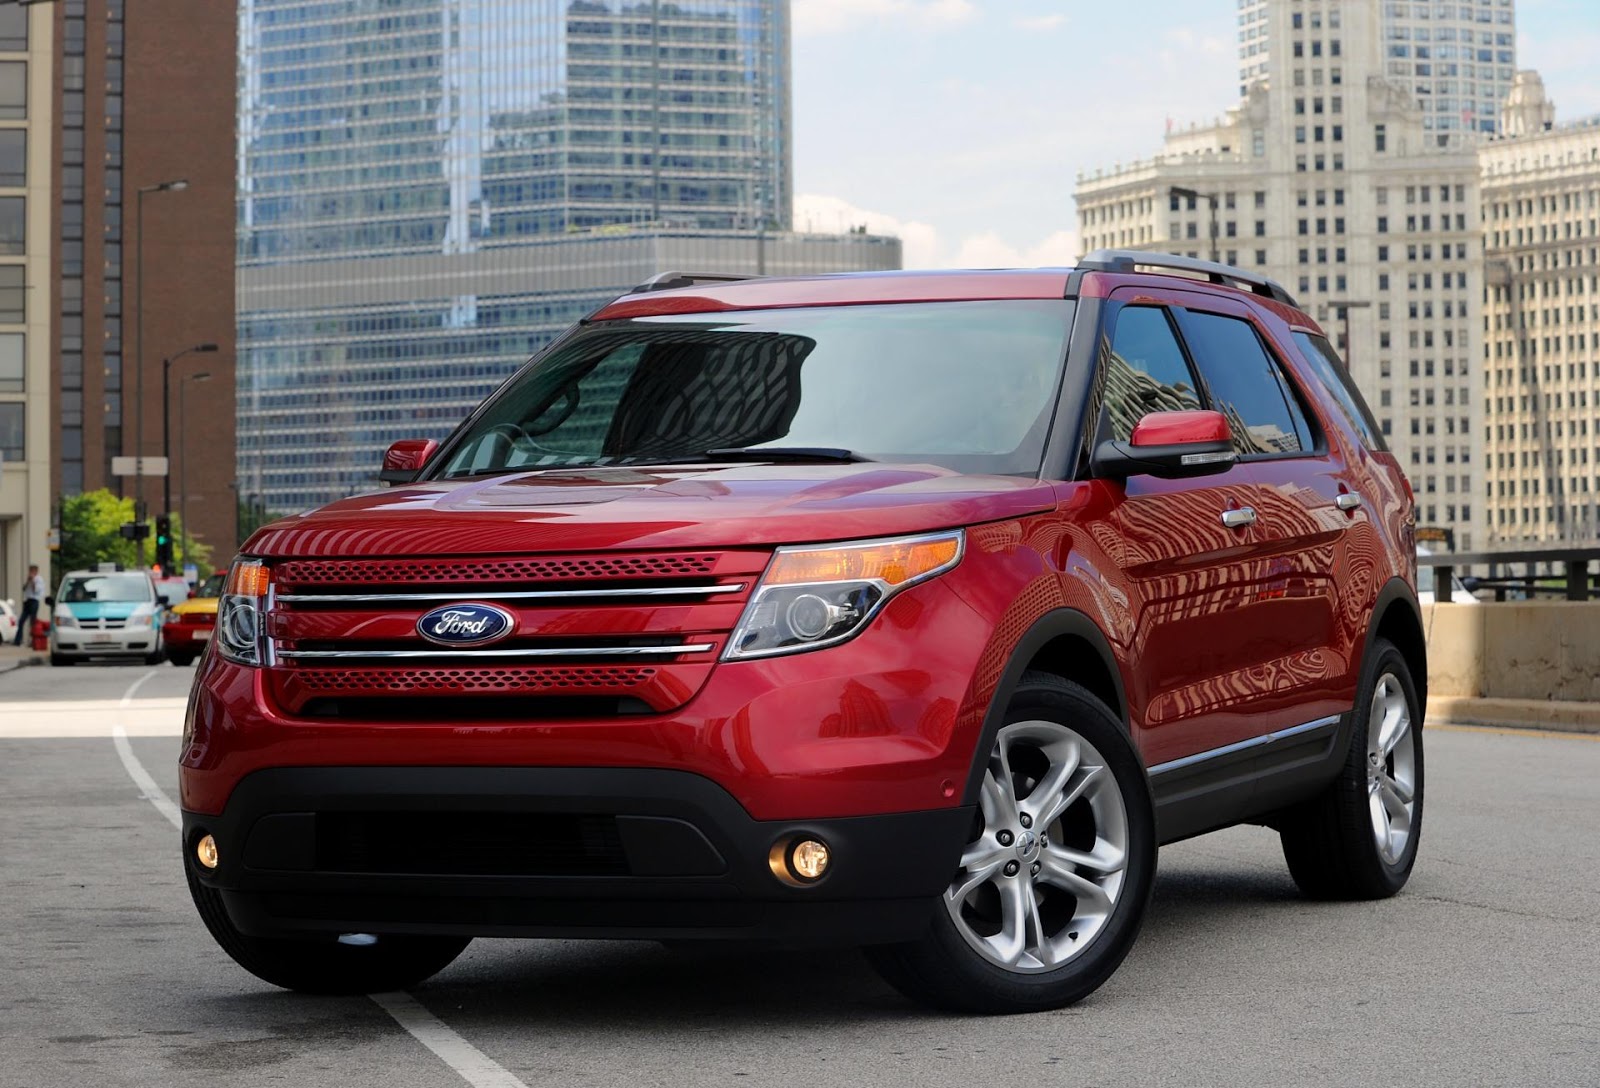 HD Wallpapers: 2011 Ford Explorer Wallpapers